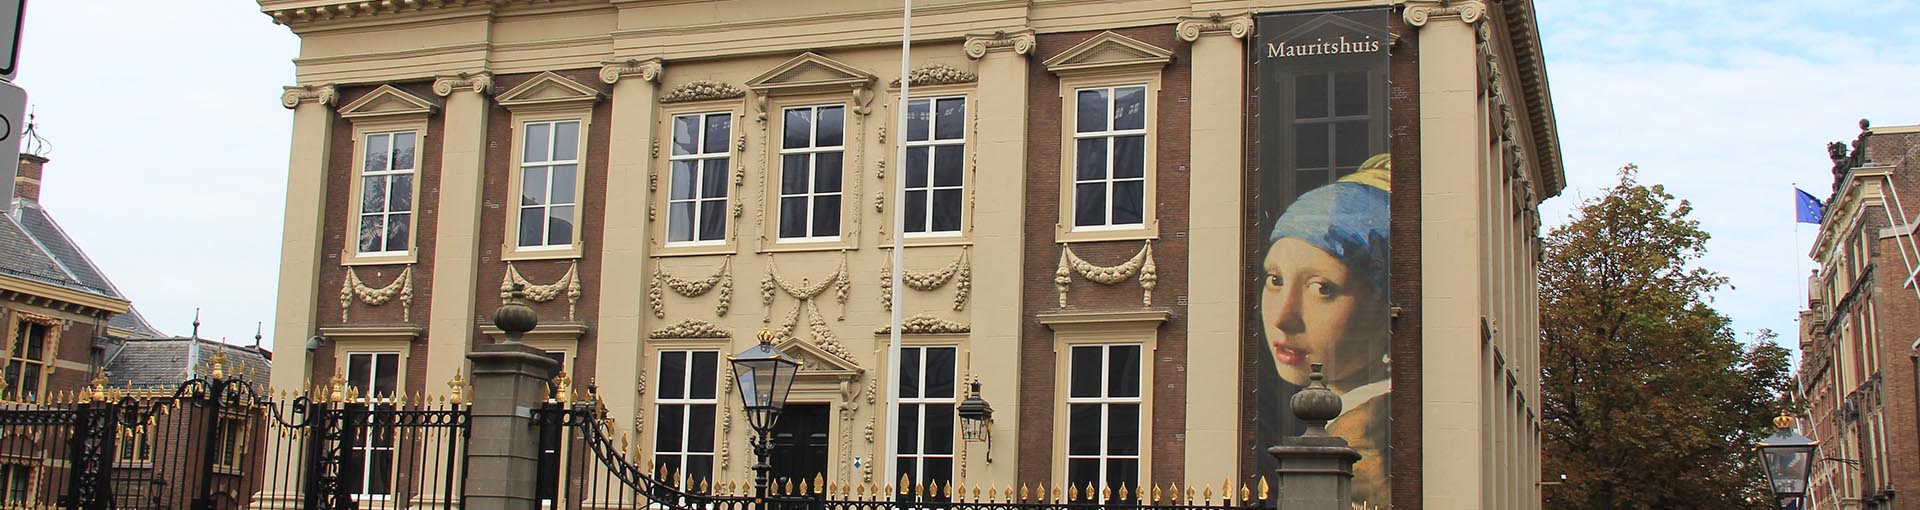 Pand Mauritshuis